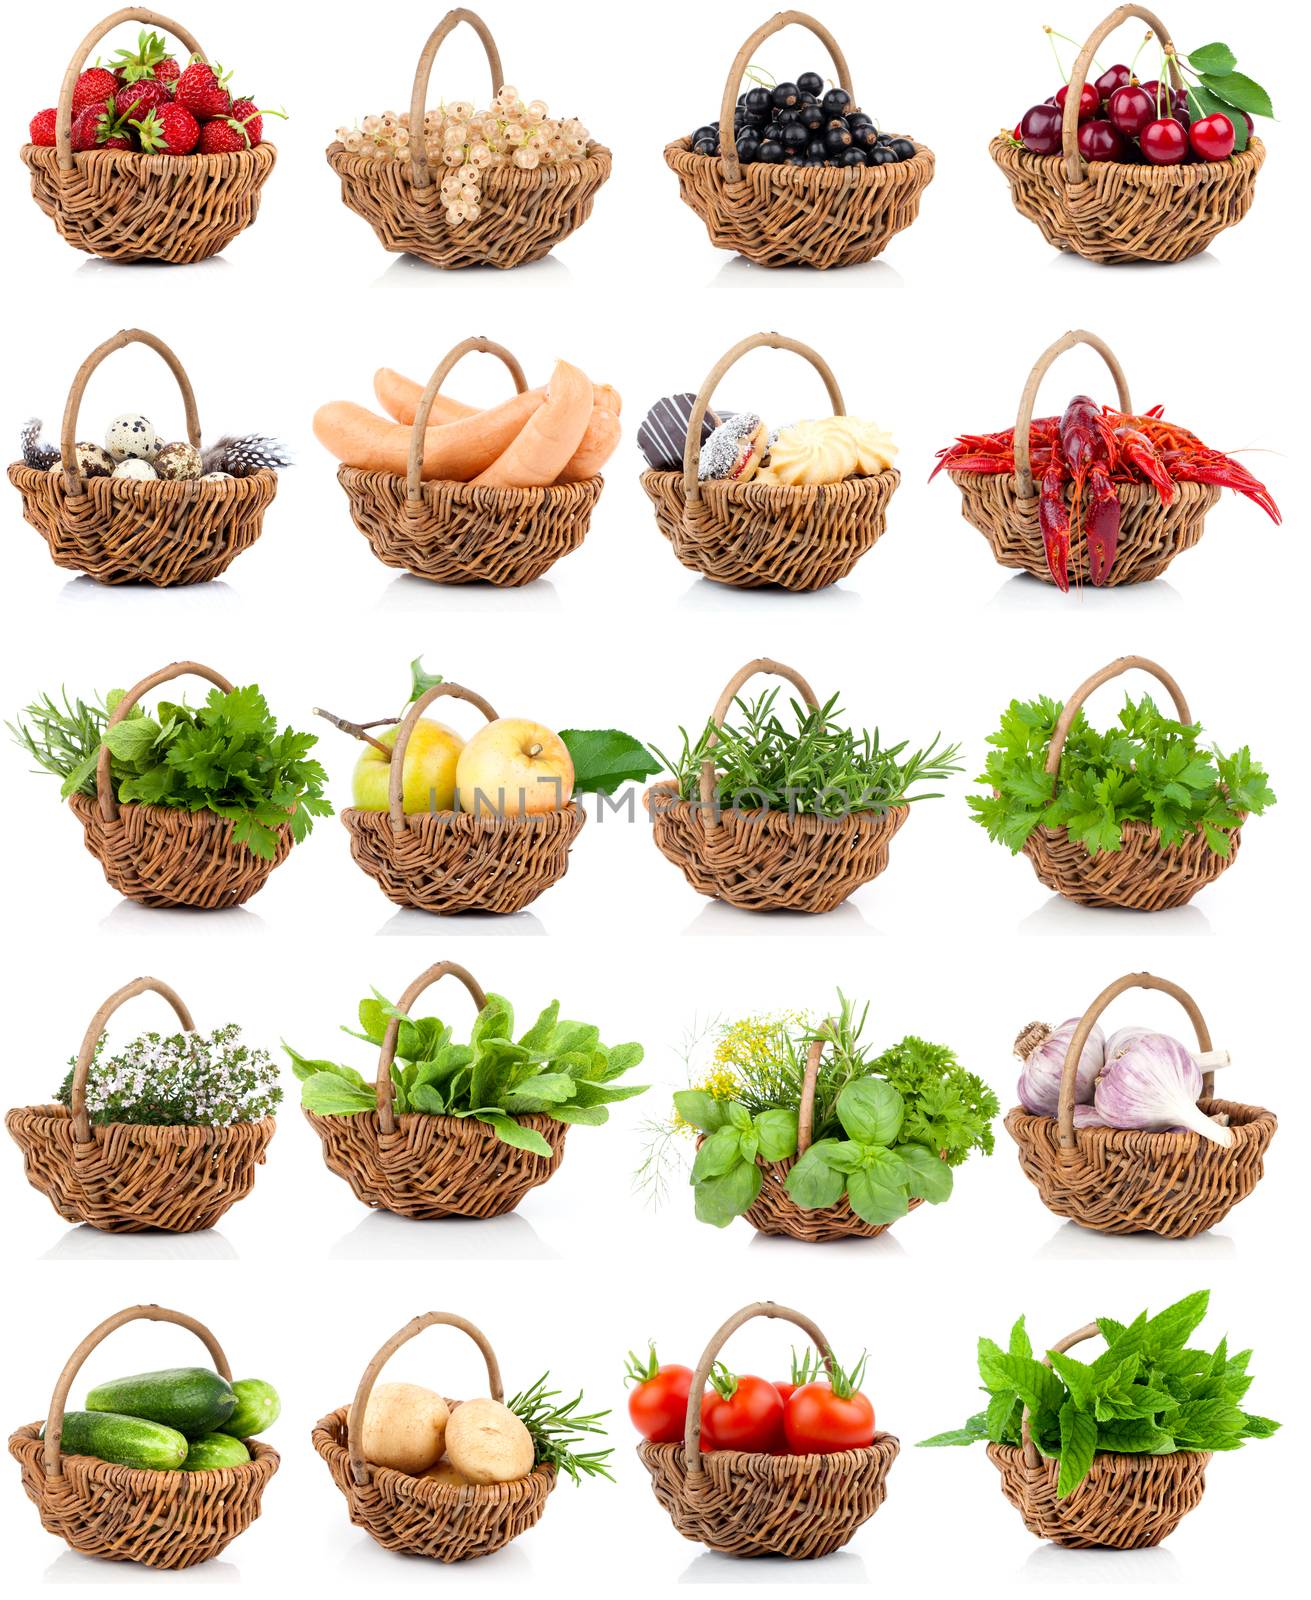 vegetation and food set in a wicker basket on a white background by motorolka